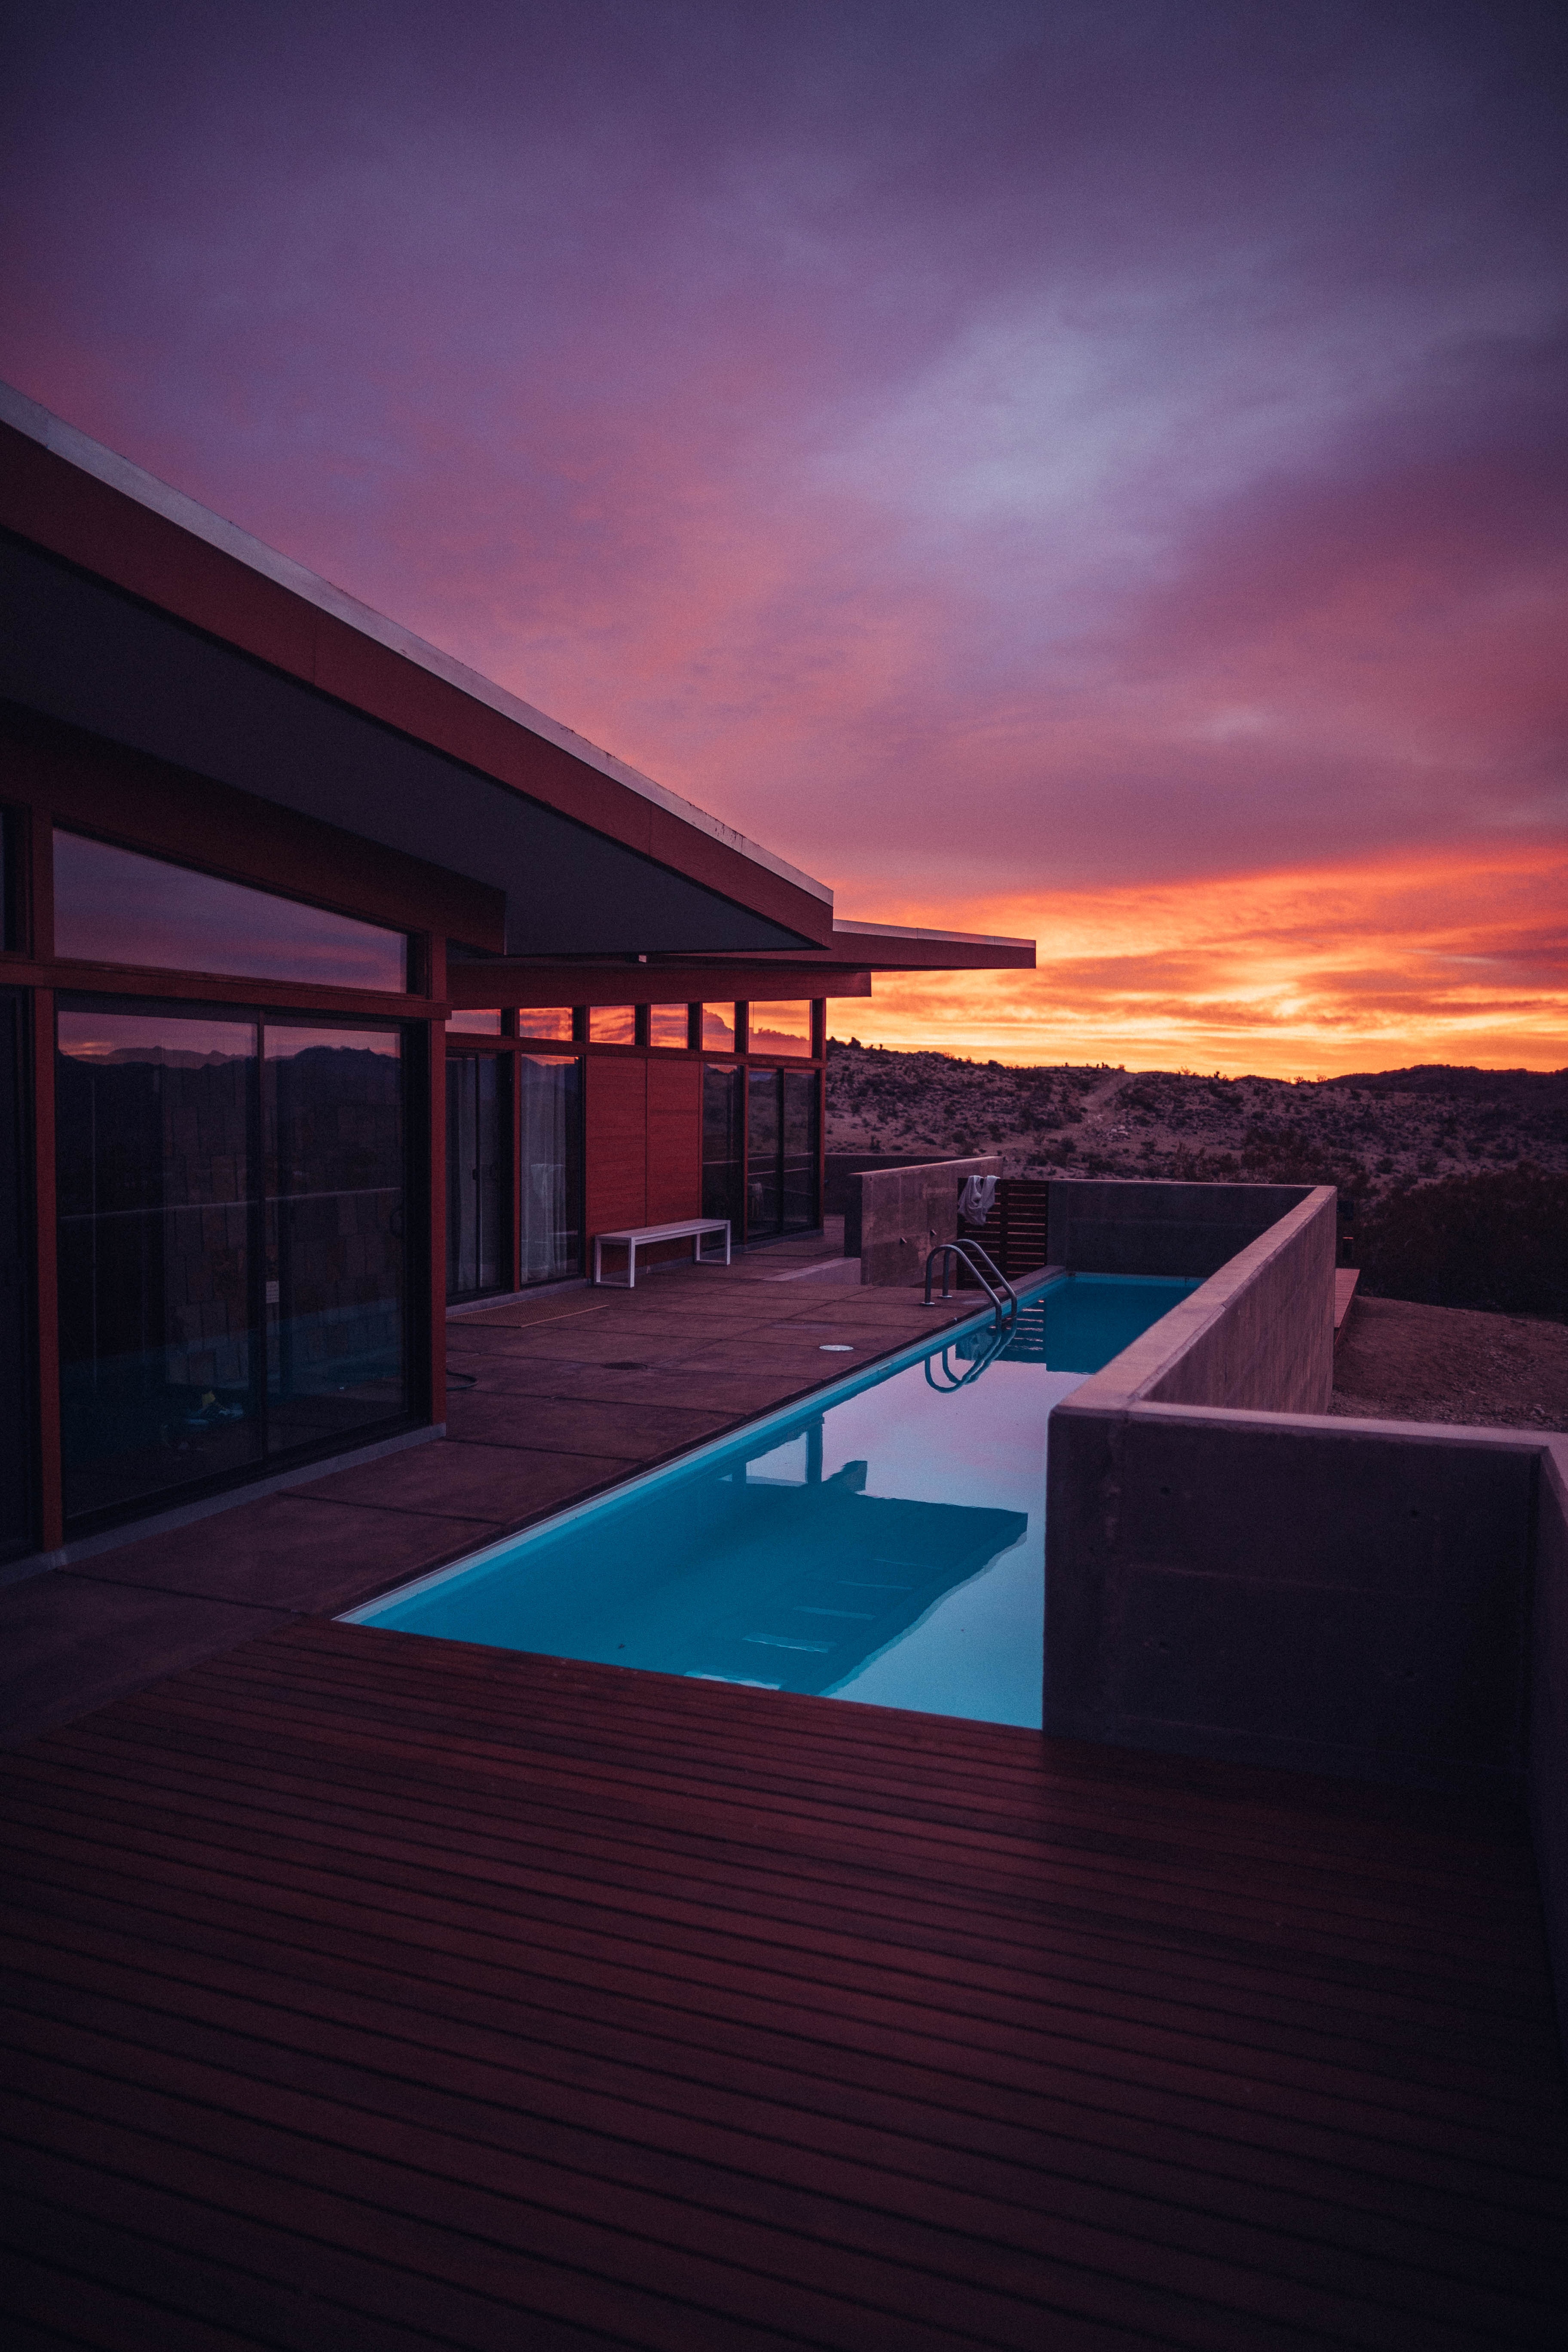 rest, balcony, sunset, miscellanea, miscellaneous, relaxation, pool Full HD